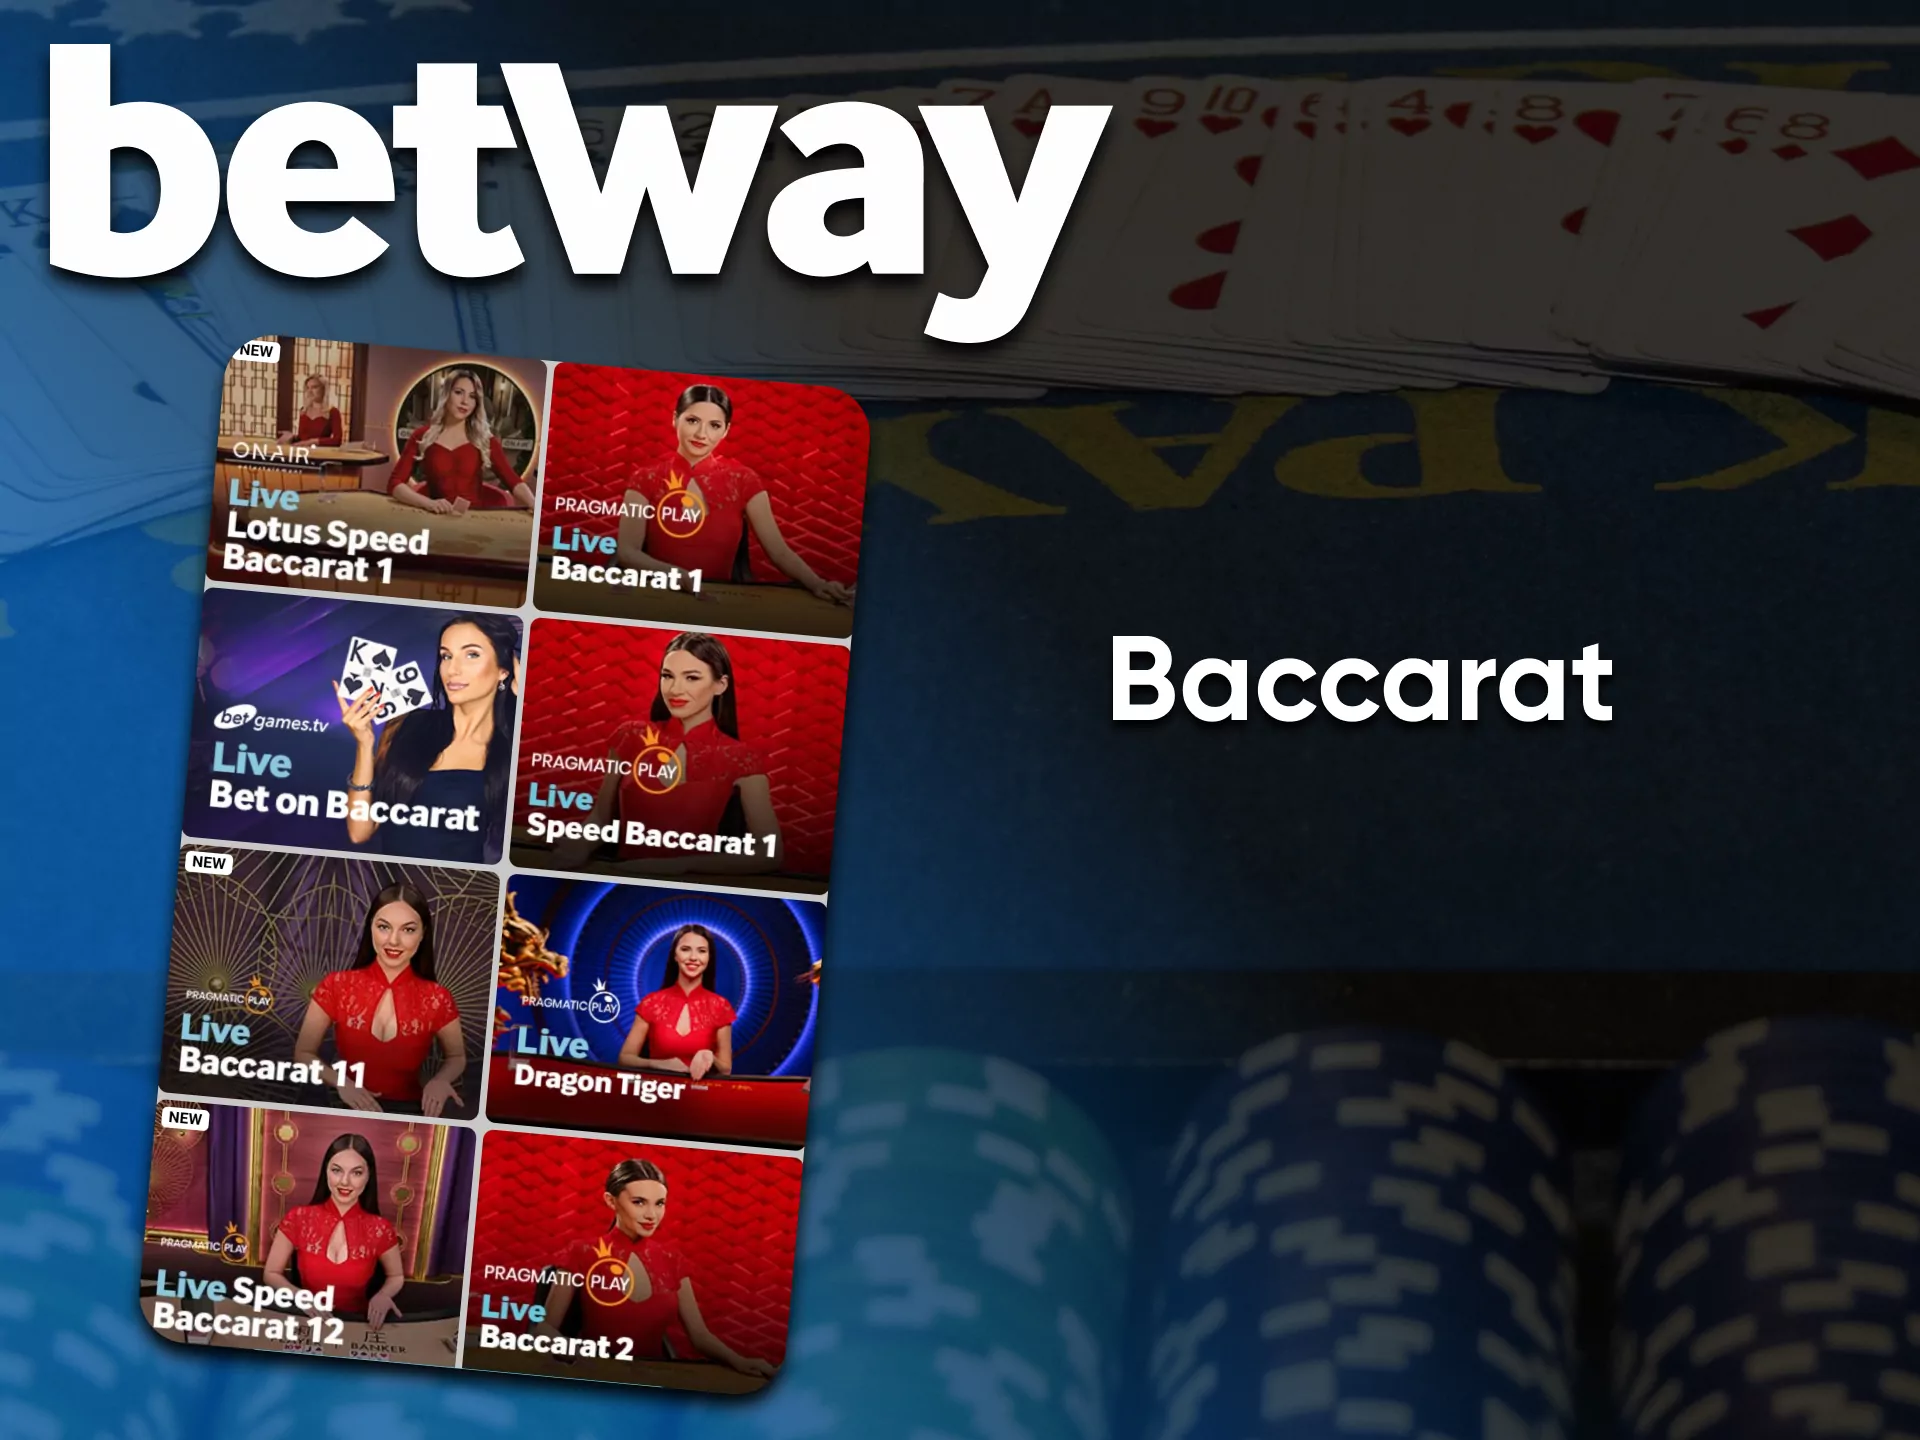 In the Betway casino, you can play Baccarat games.